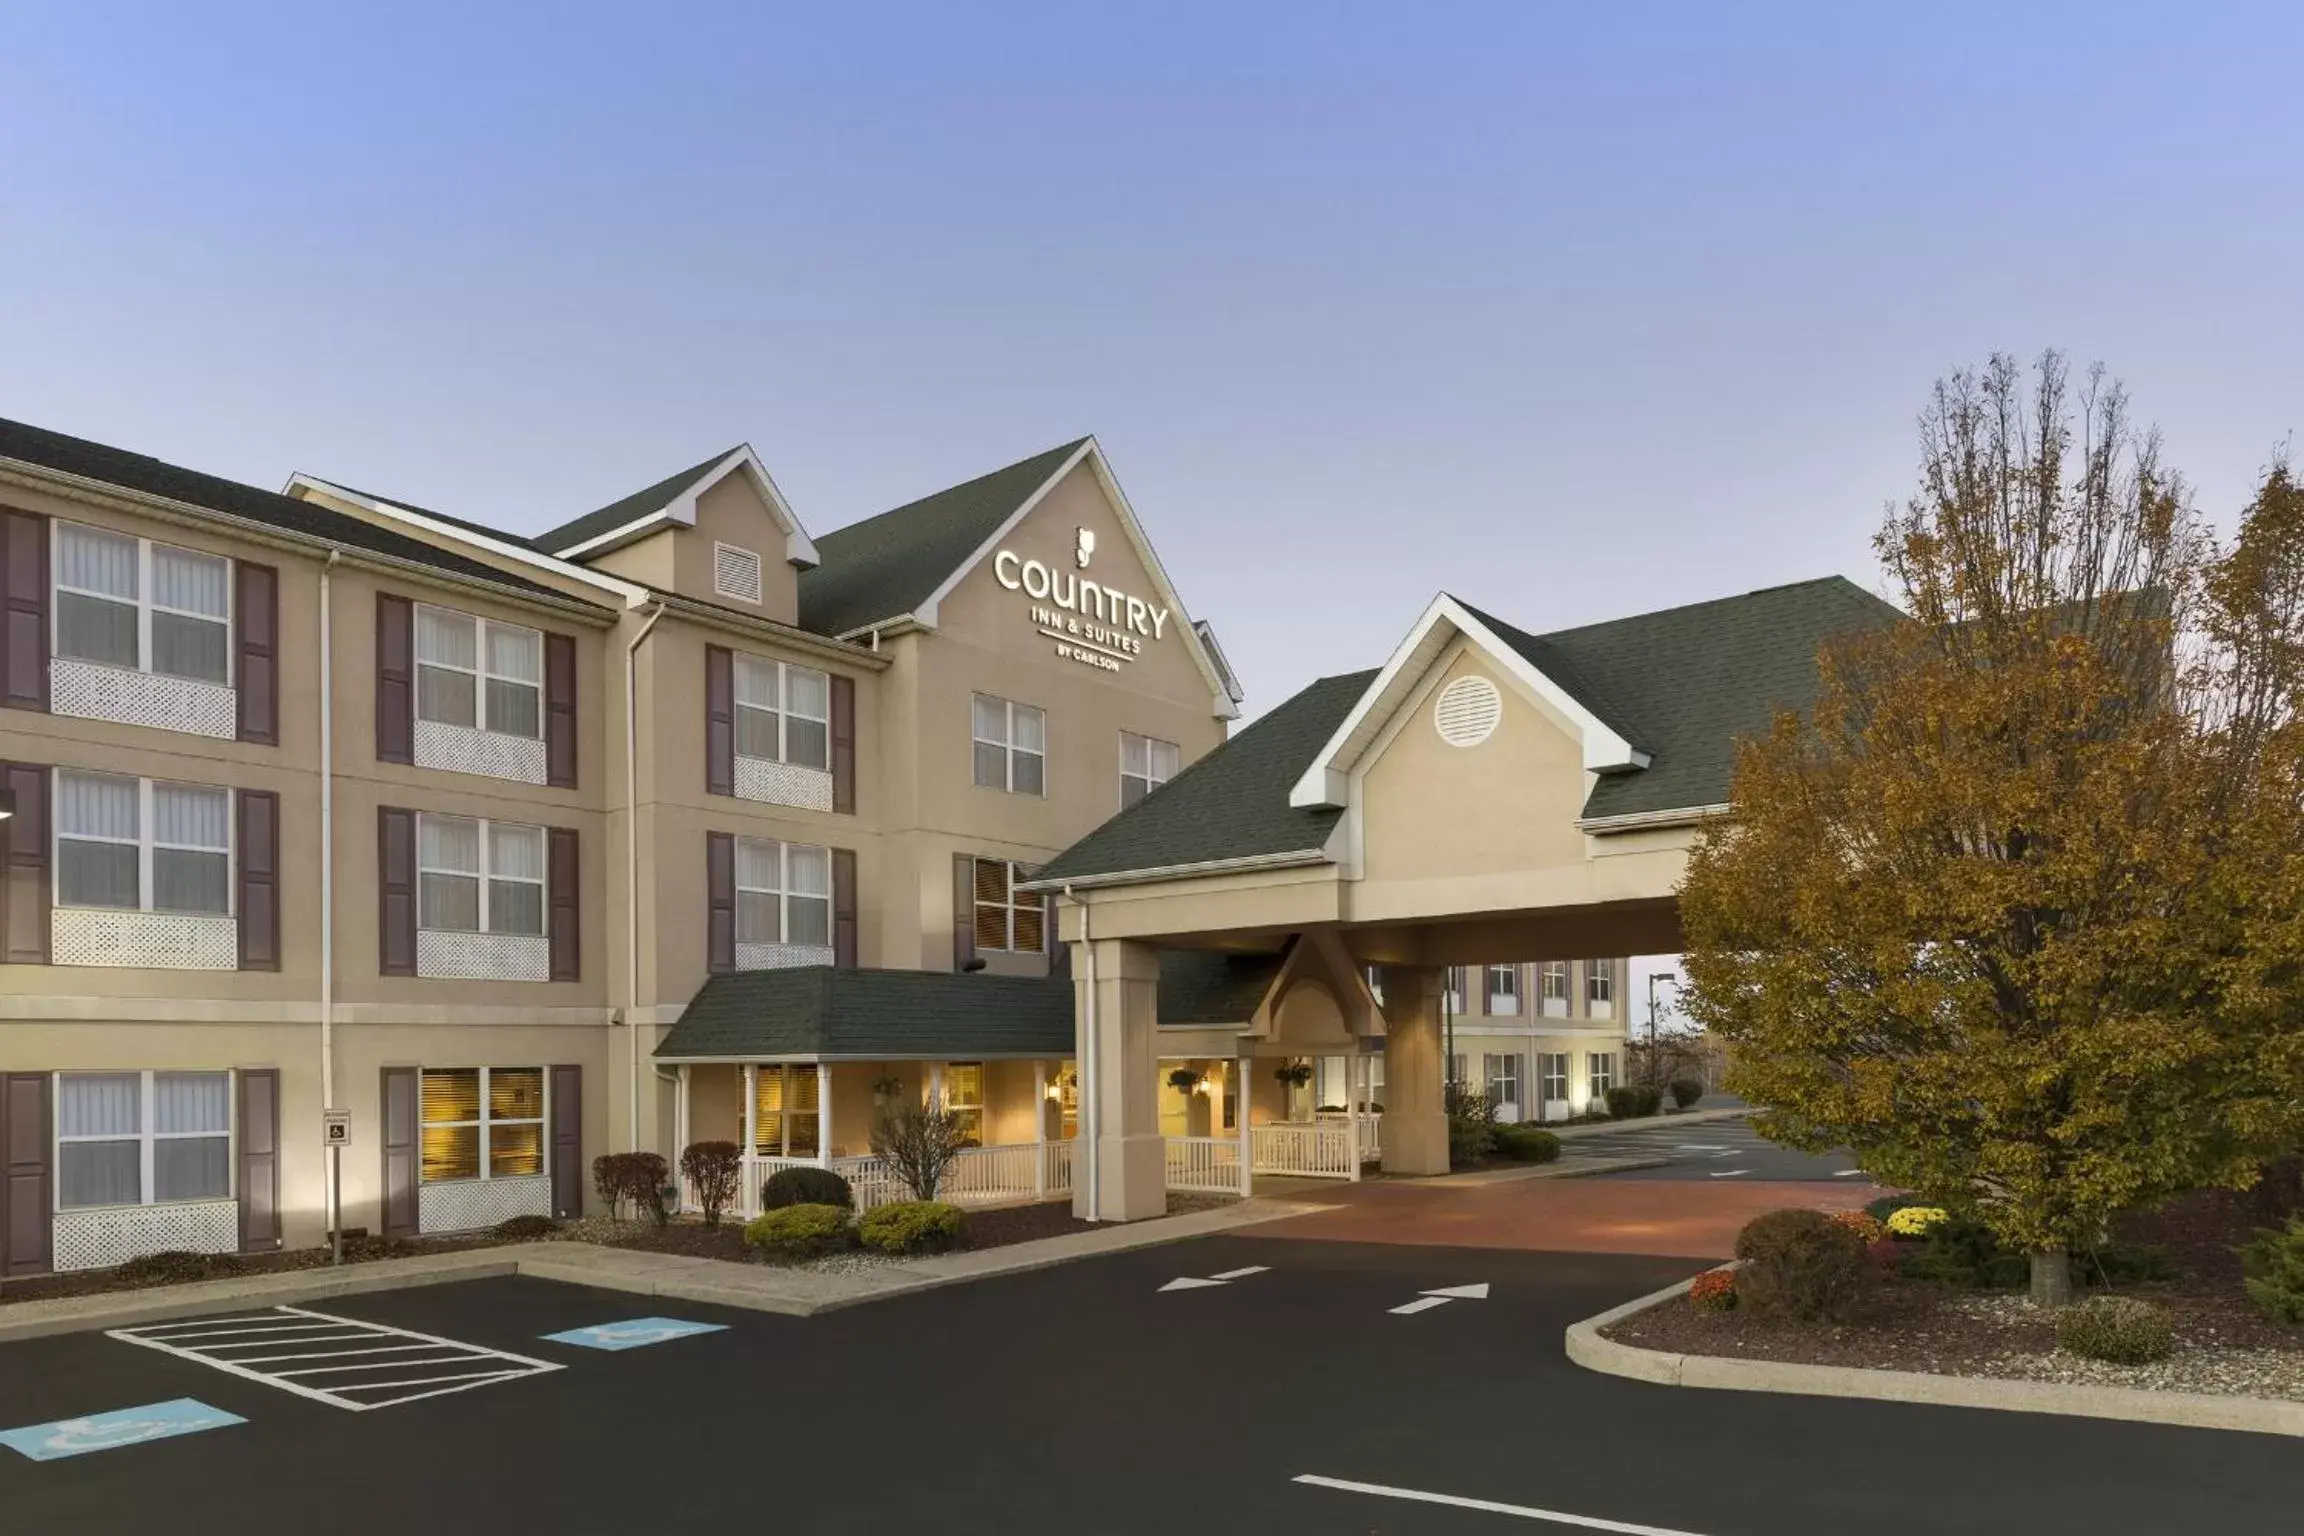 Street view, Property Building in Country Inn & Suites by Radisson, Frackville (Pottsville), PA